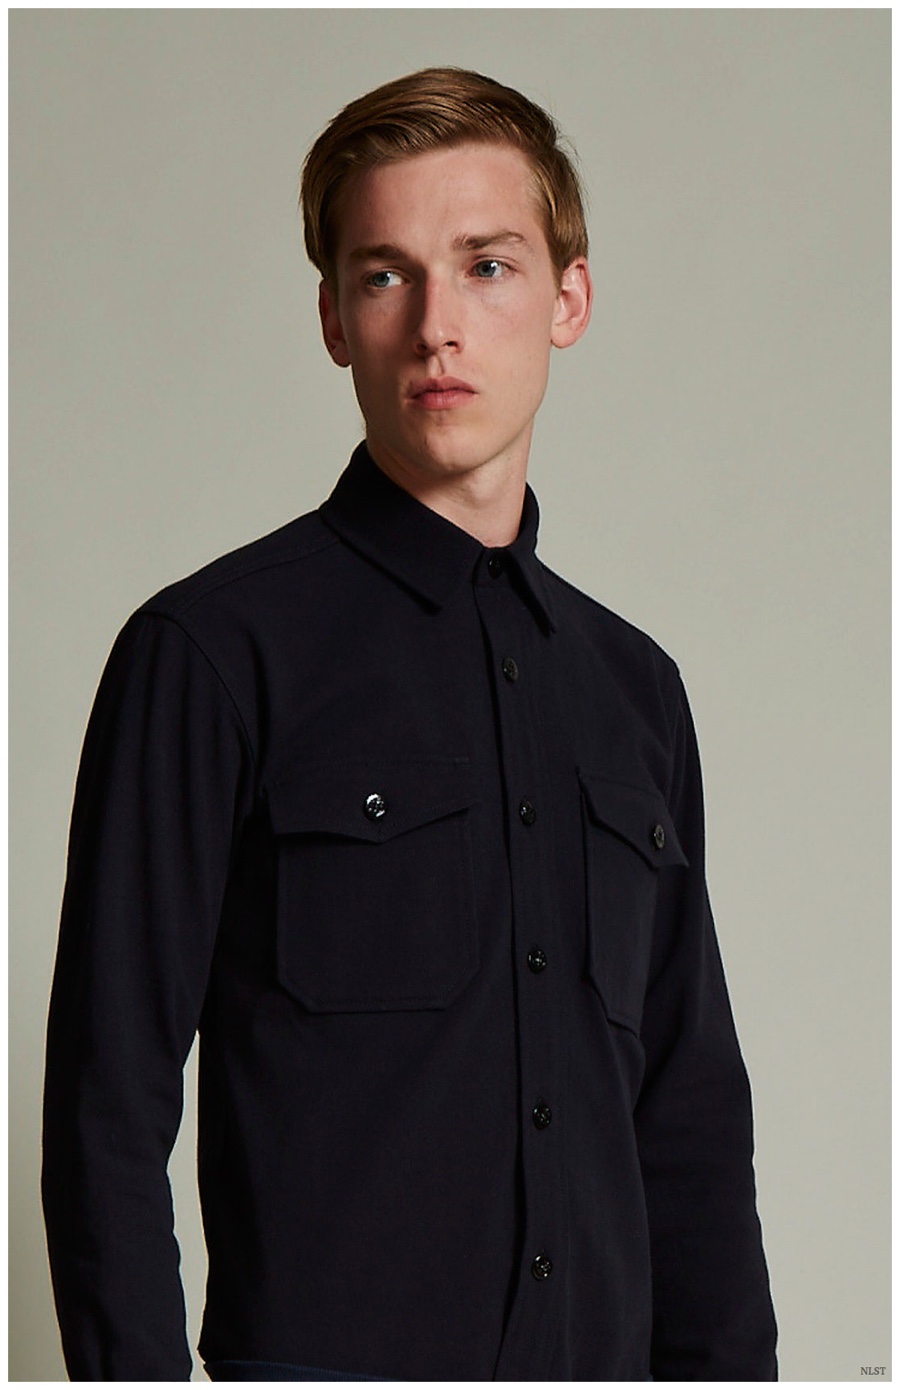 NLST Embraces Navy Inspired Styles for Spring 2015 Collection